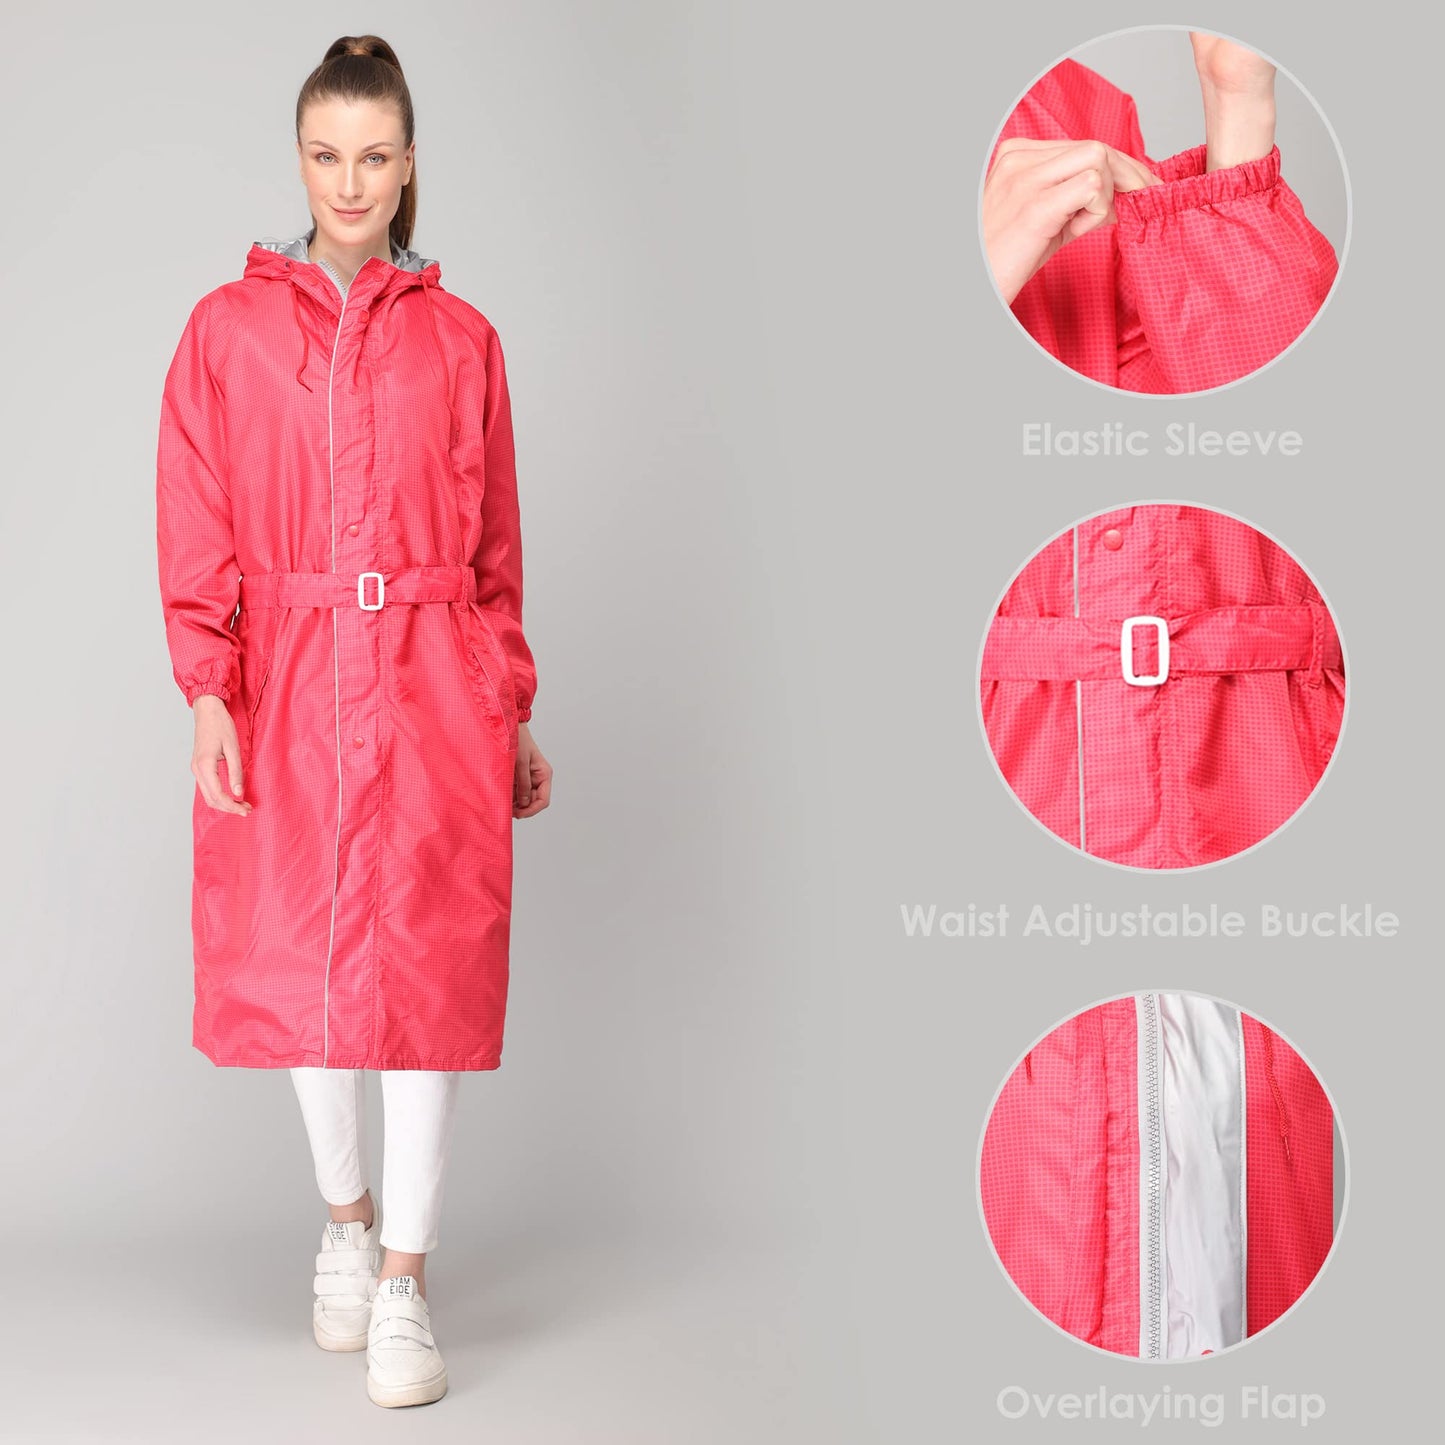 THE CLOWNFISH Polyester Long Length Raincoats For Women Waterproof Reversible Double Layer. Brilliant Pro Series (Red, X-Large)